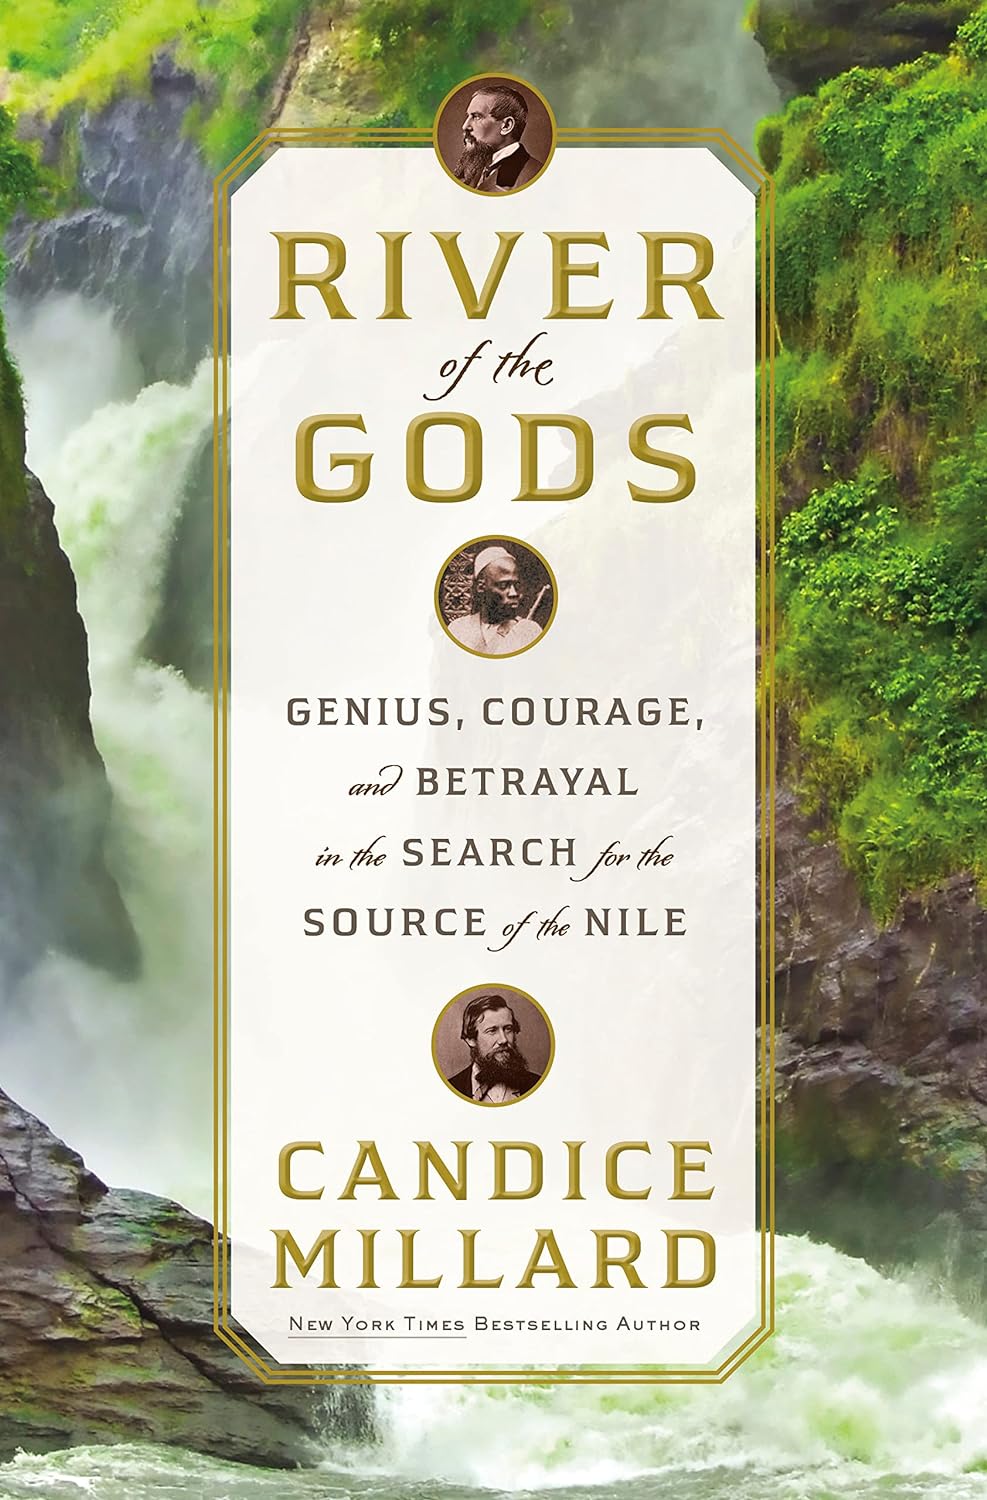 Image for "River of the Gods: Genius, Courage, and Betrayal in the Search for the Source of the Nile"